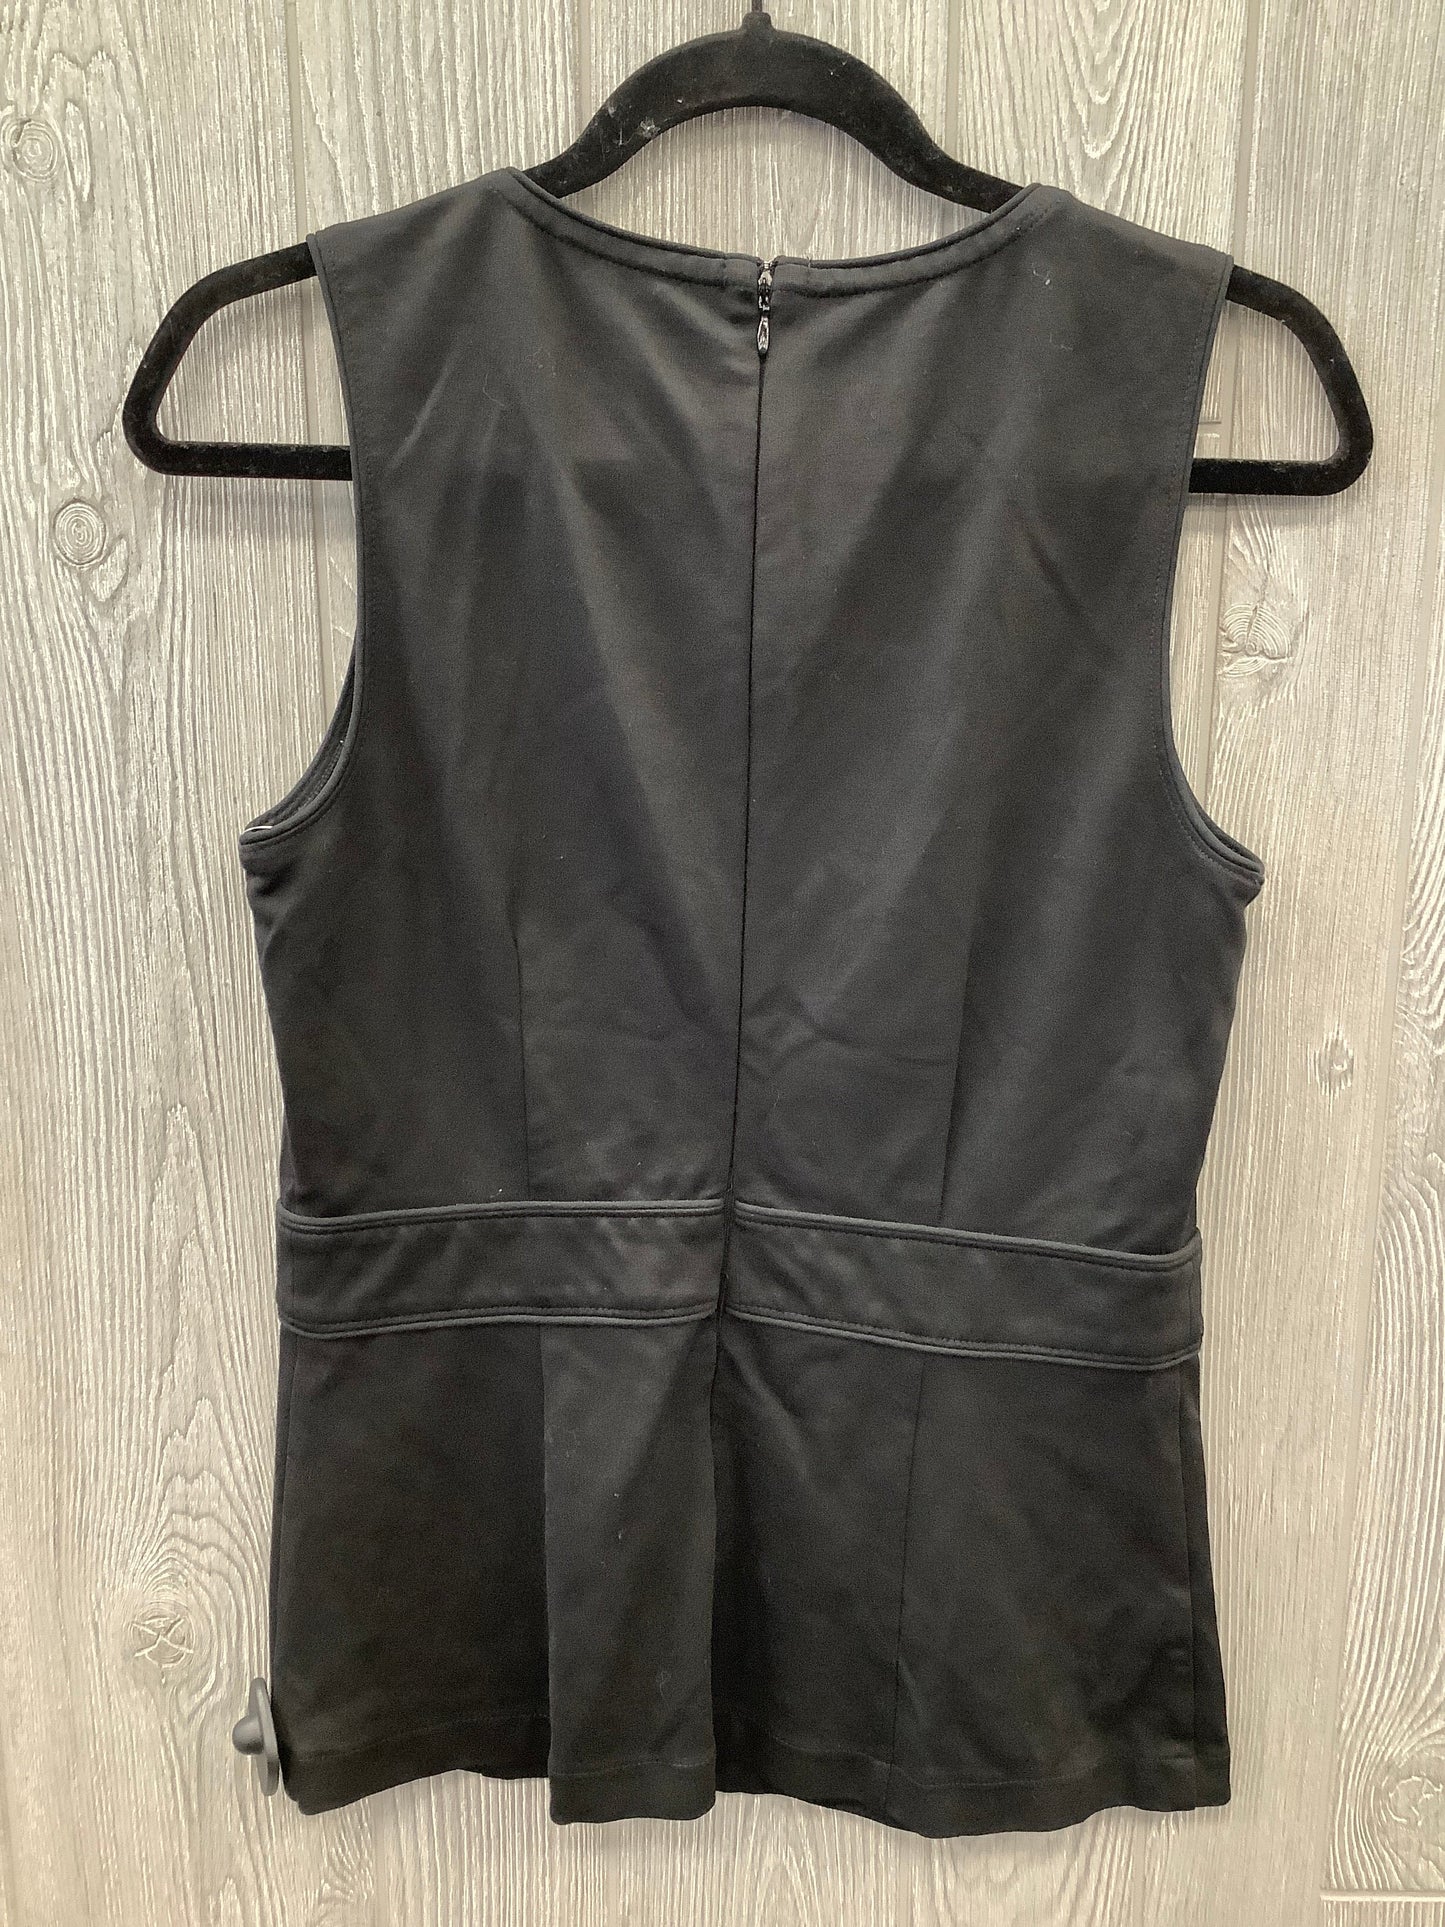 Blouse Sleeveless By Ann Taylor  Size: S